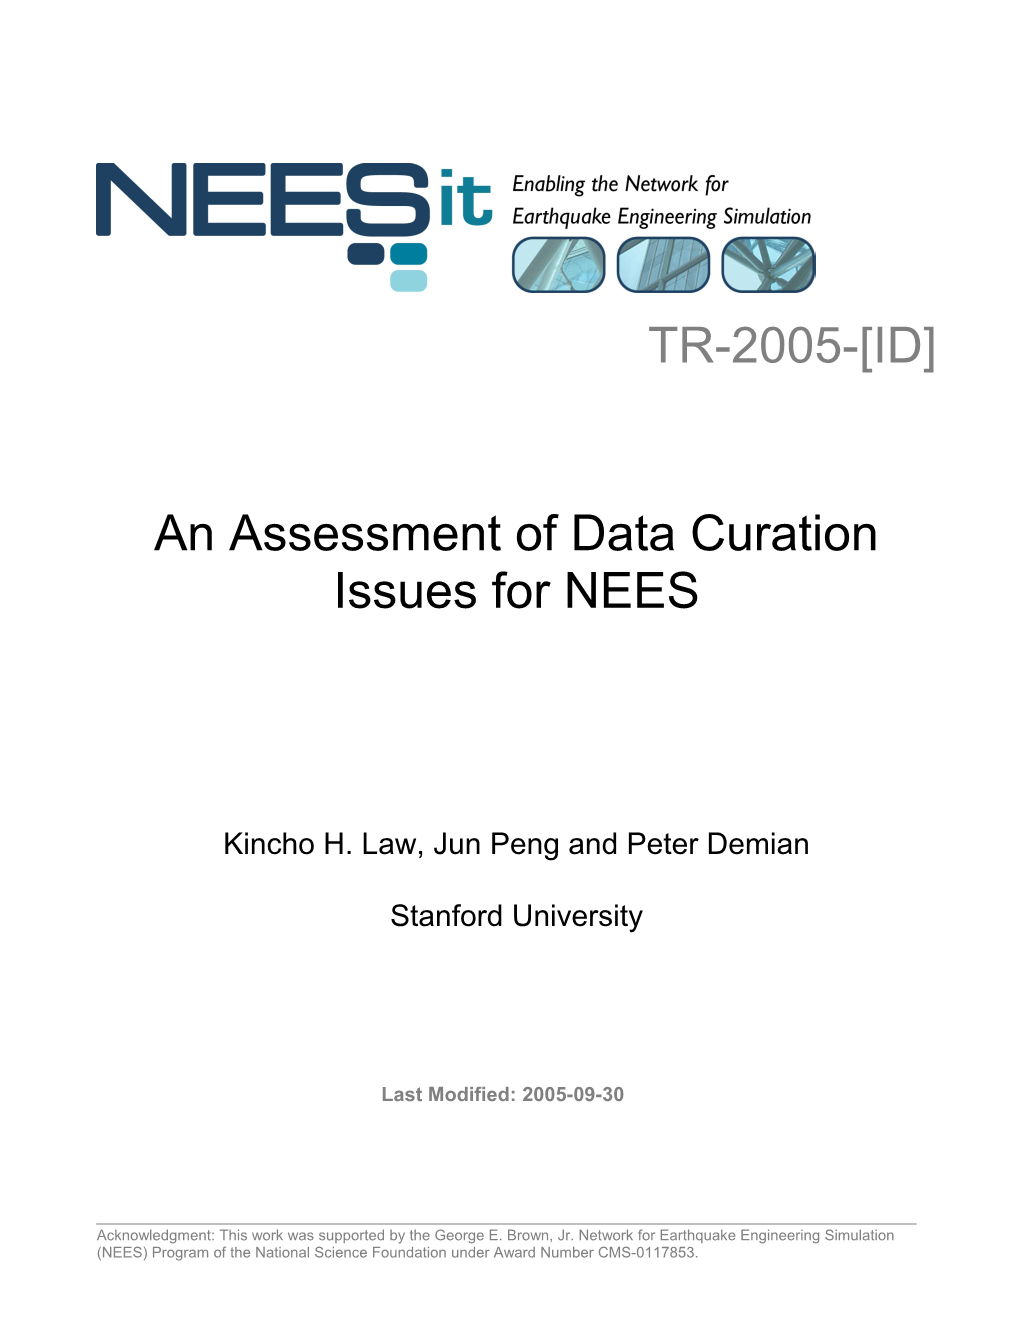 An Assessment of Data Curation Issues for NEES